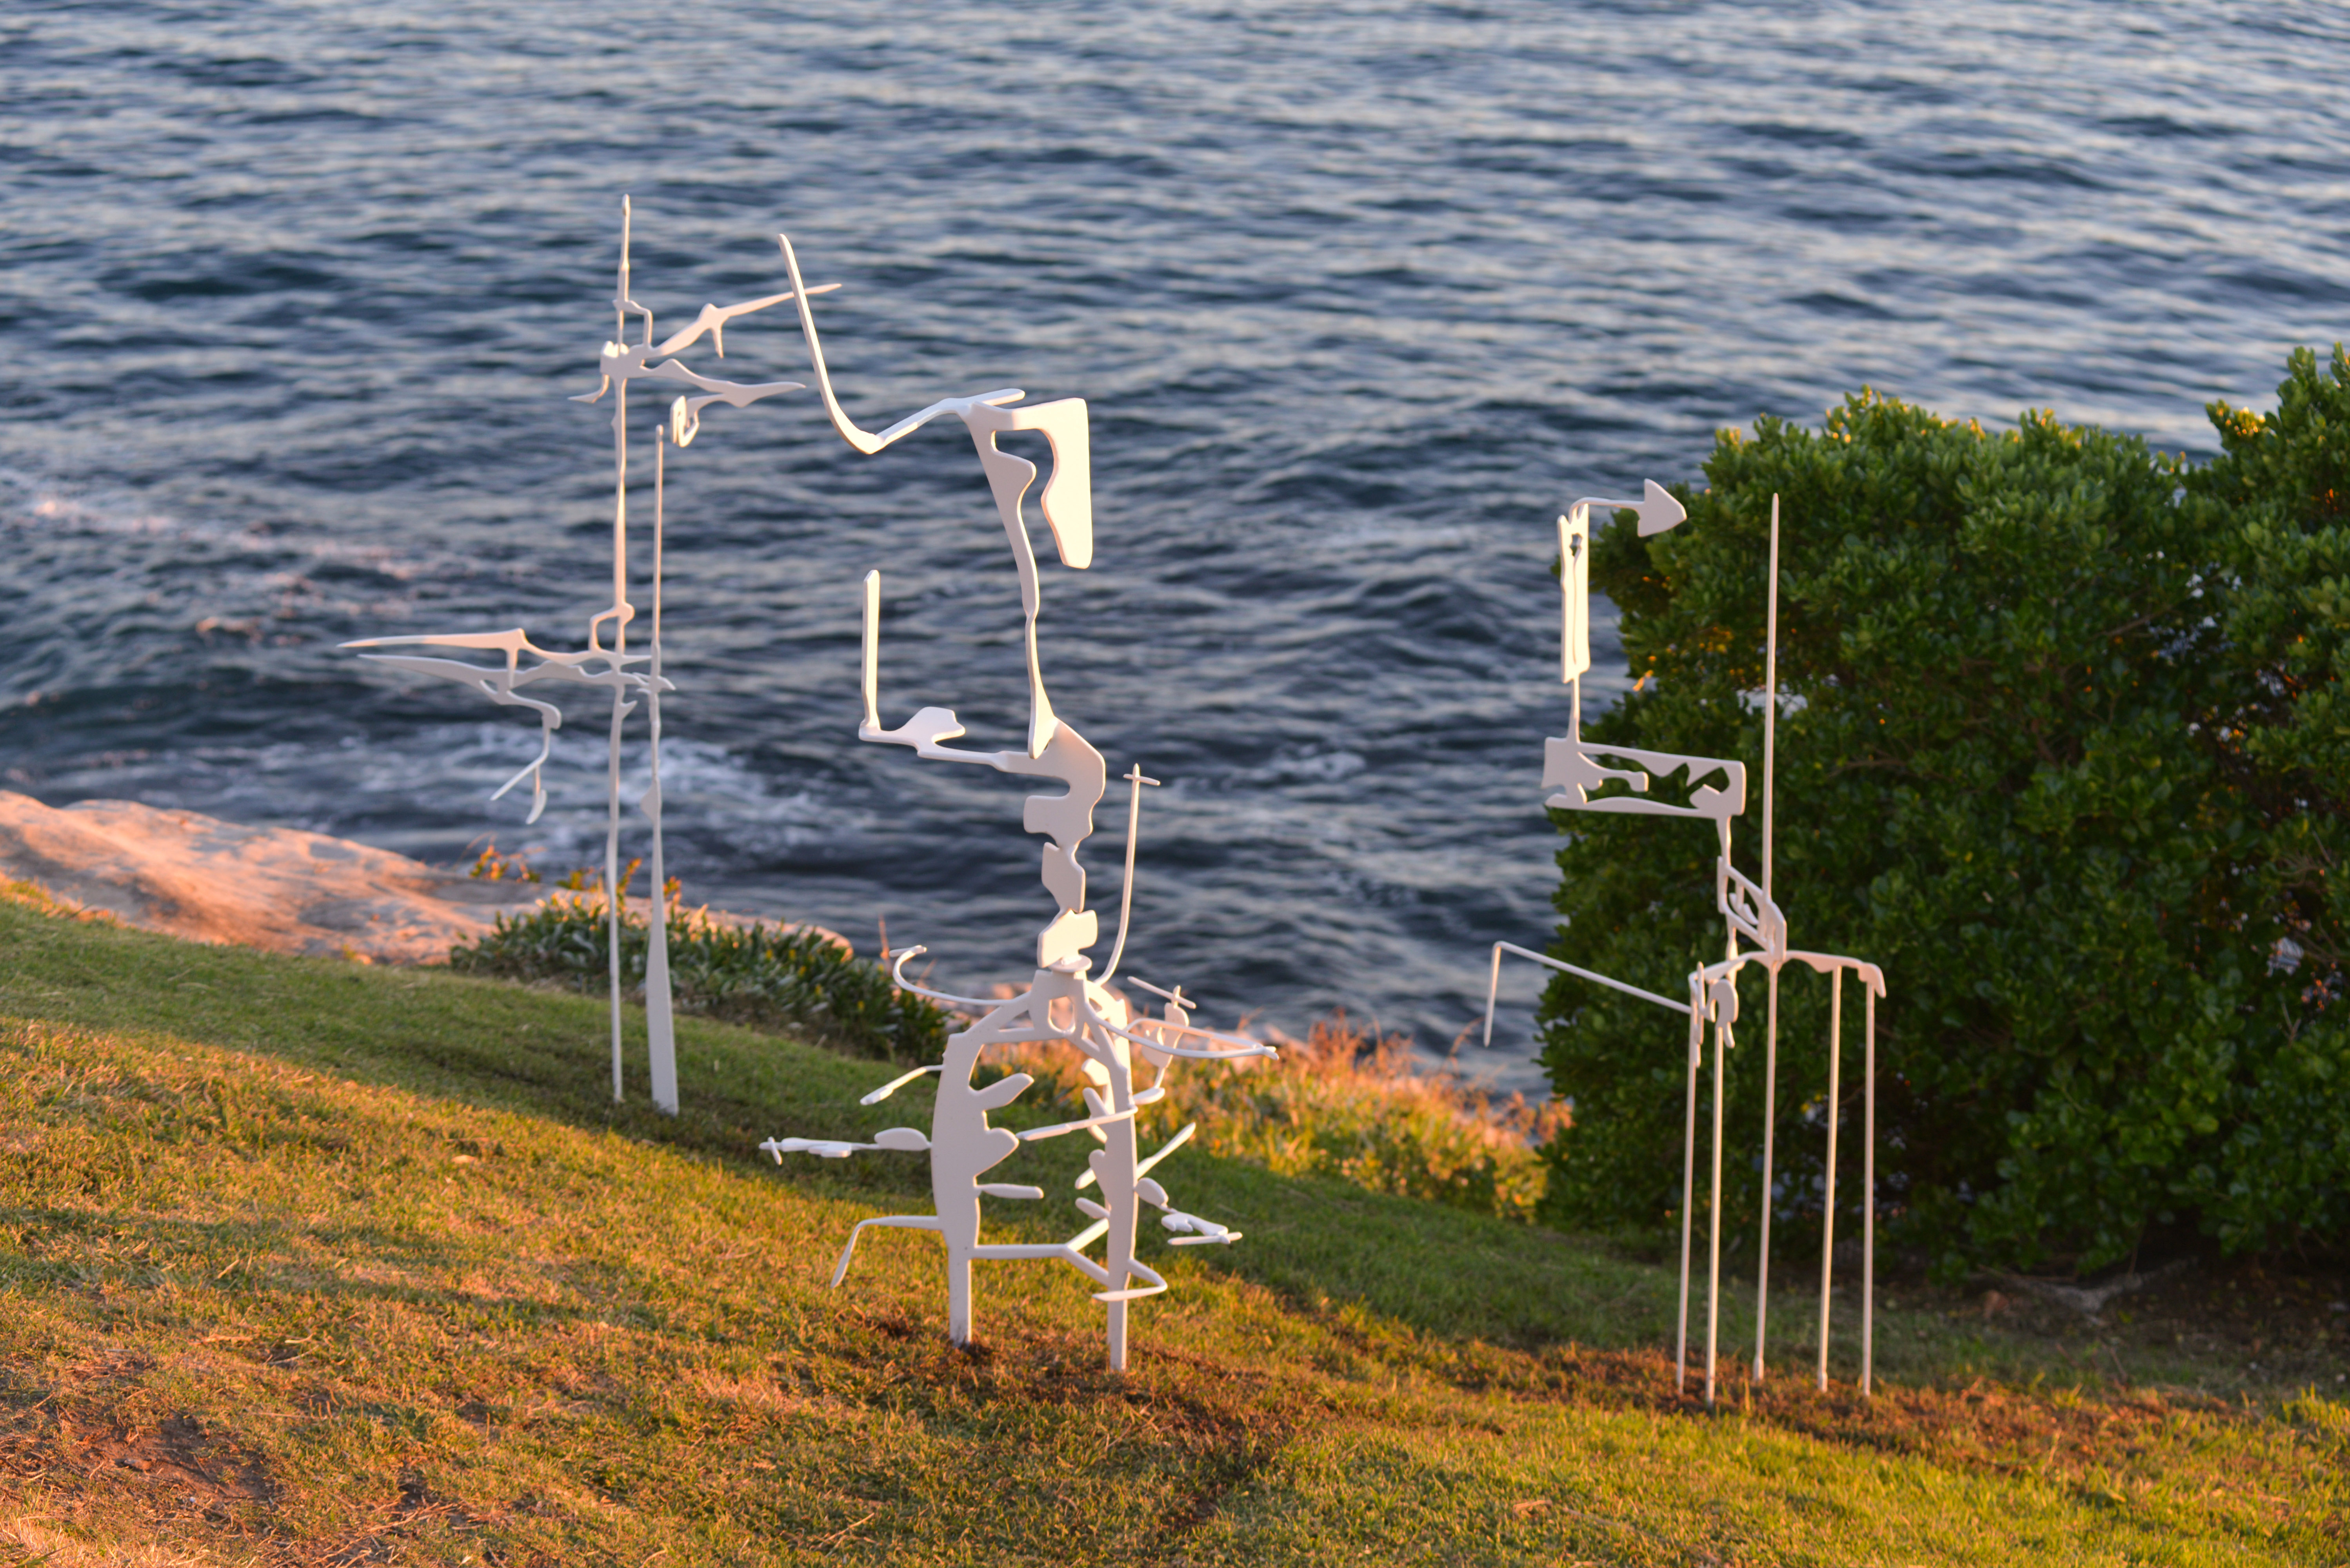 Sophie Clague, The Visitors, Sculpture by the Sea, Bondi 2016. Photo Clyde Yee